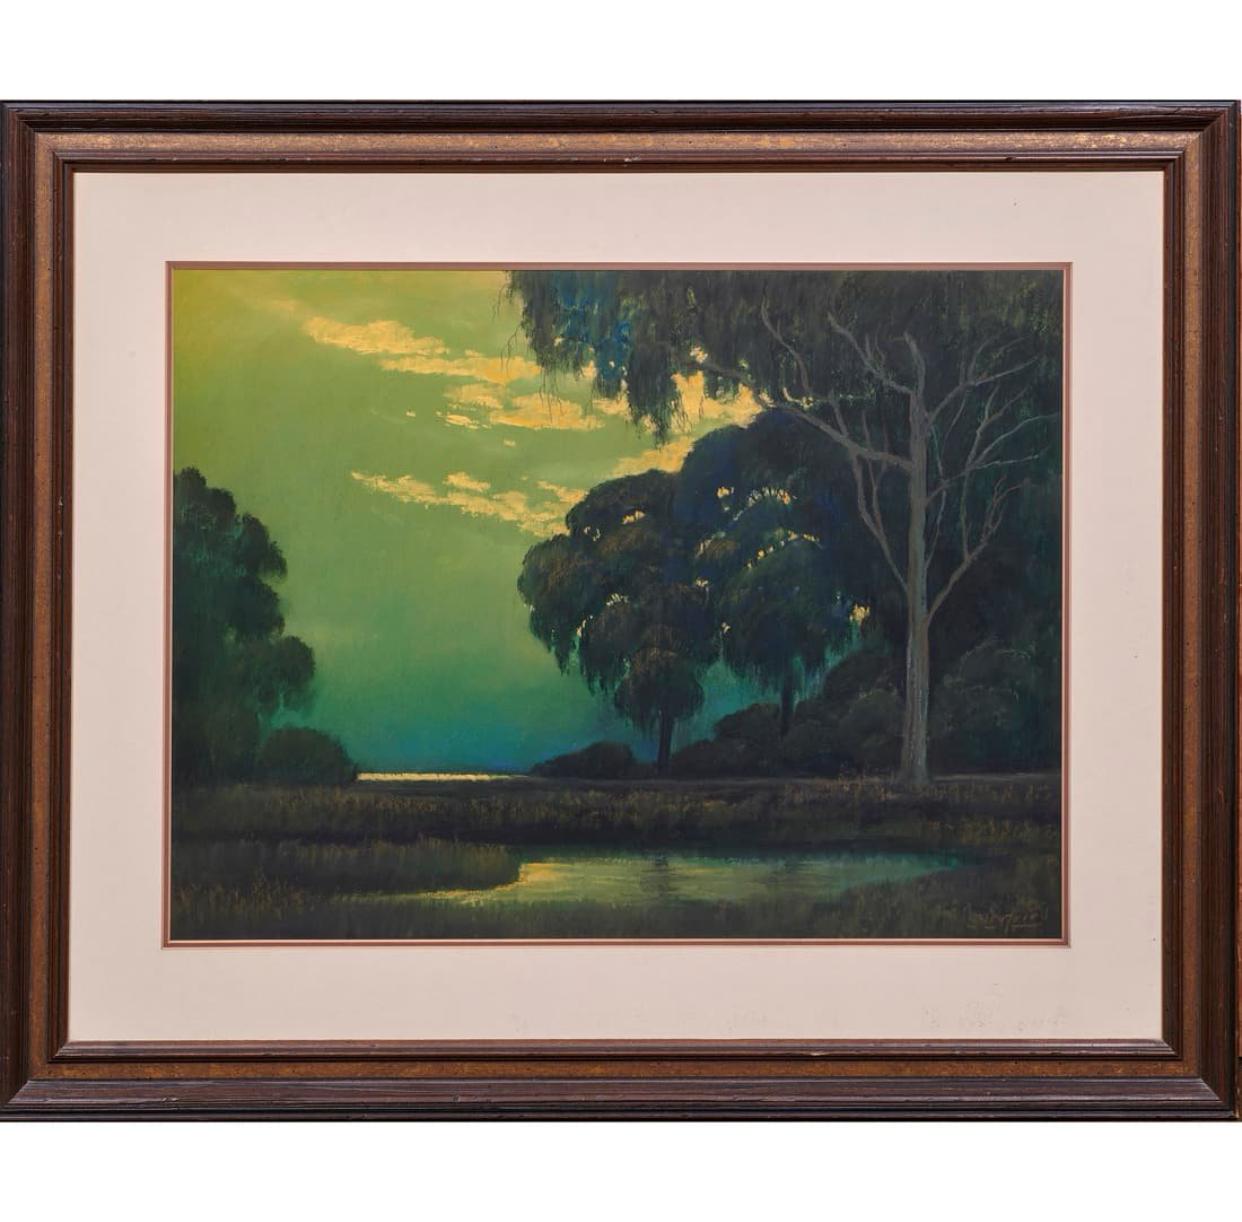 Moody pastel on paper by Edwin C. Siegfried, one of the top Pastelists of this period. This piece is titled “Moonlit Marsh”. Framed in a walnut stained wood with parcel gilt details. An antique white matte all under glass. The sight measurements are